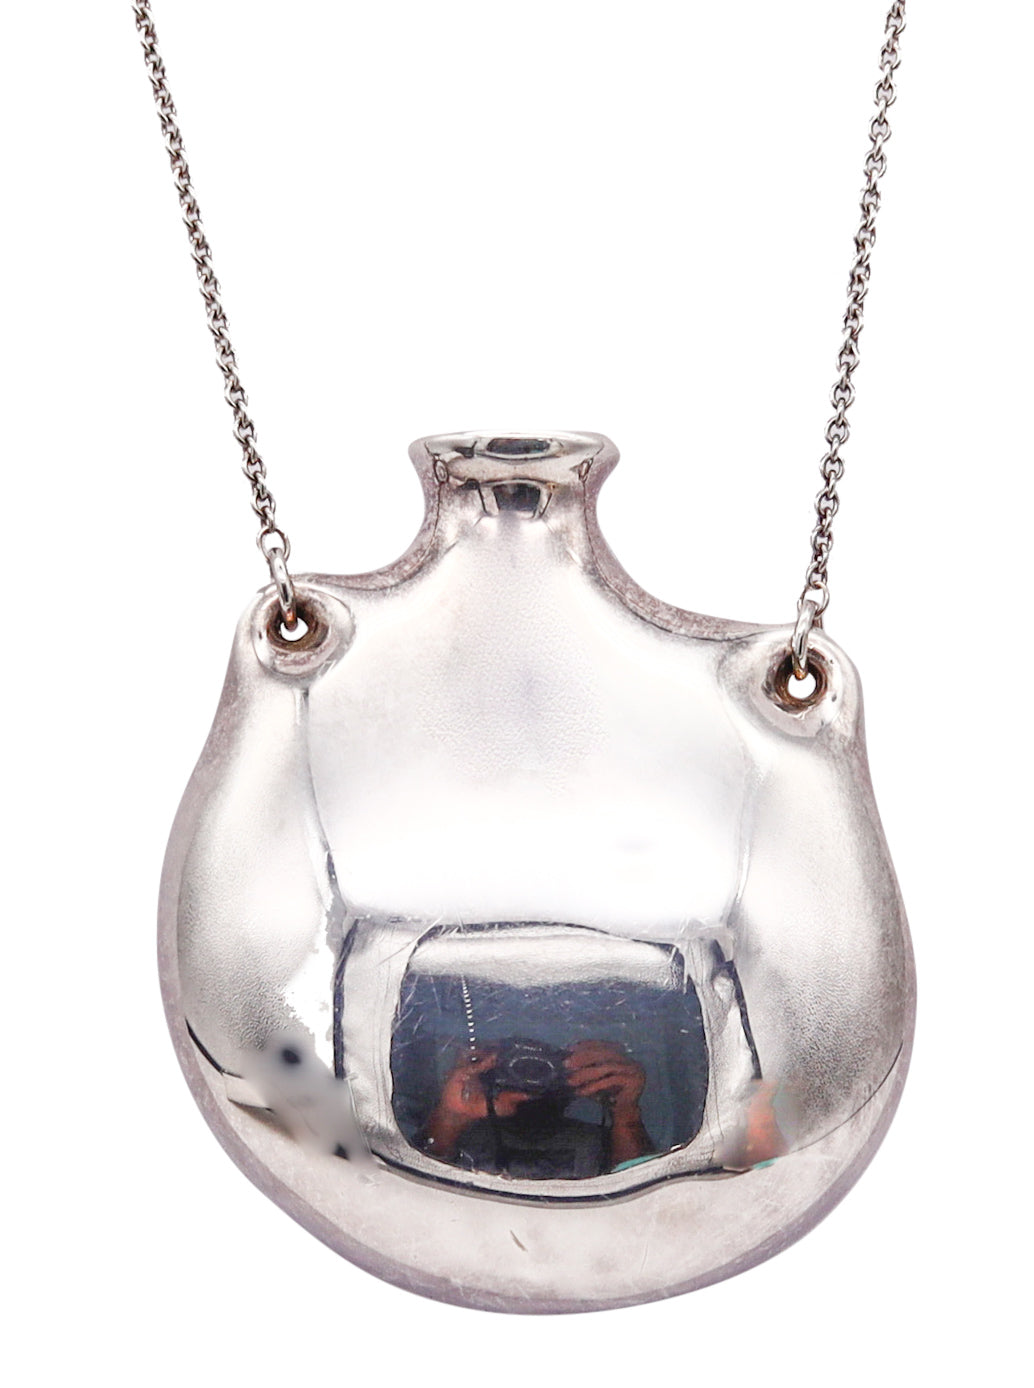 -Tiffany & Co. 1977 By Elsa Peretti Large Freeform Open Bottle Necklace in 925 Sterling Silver